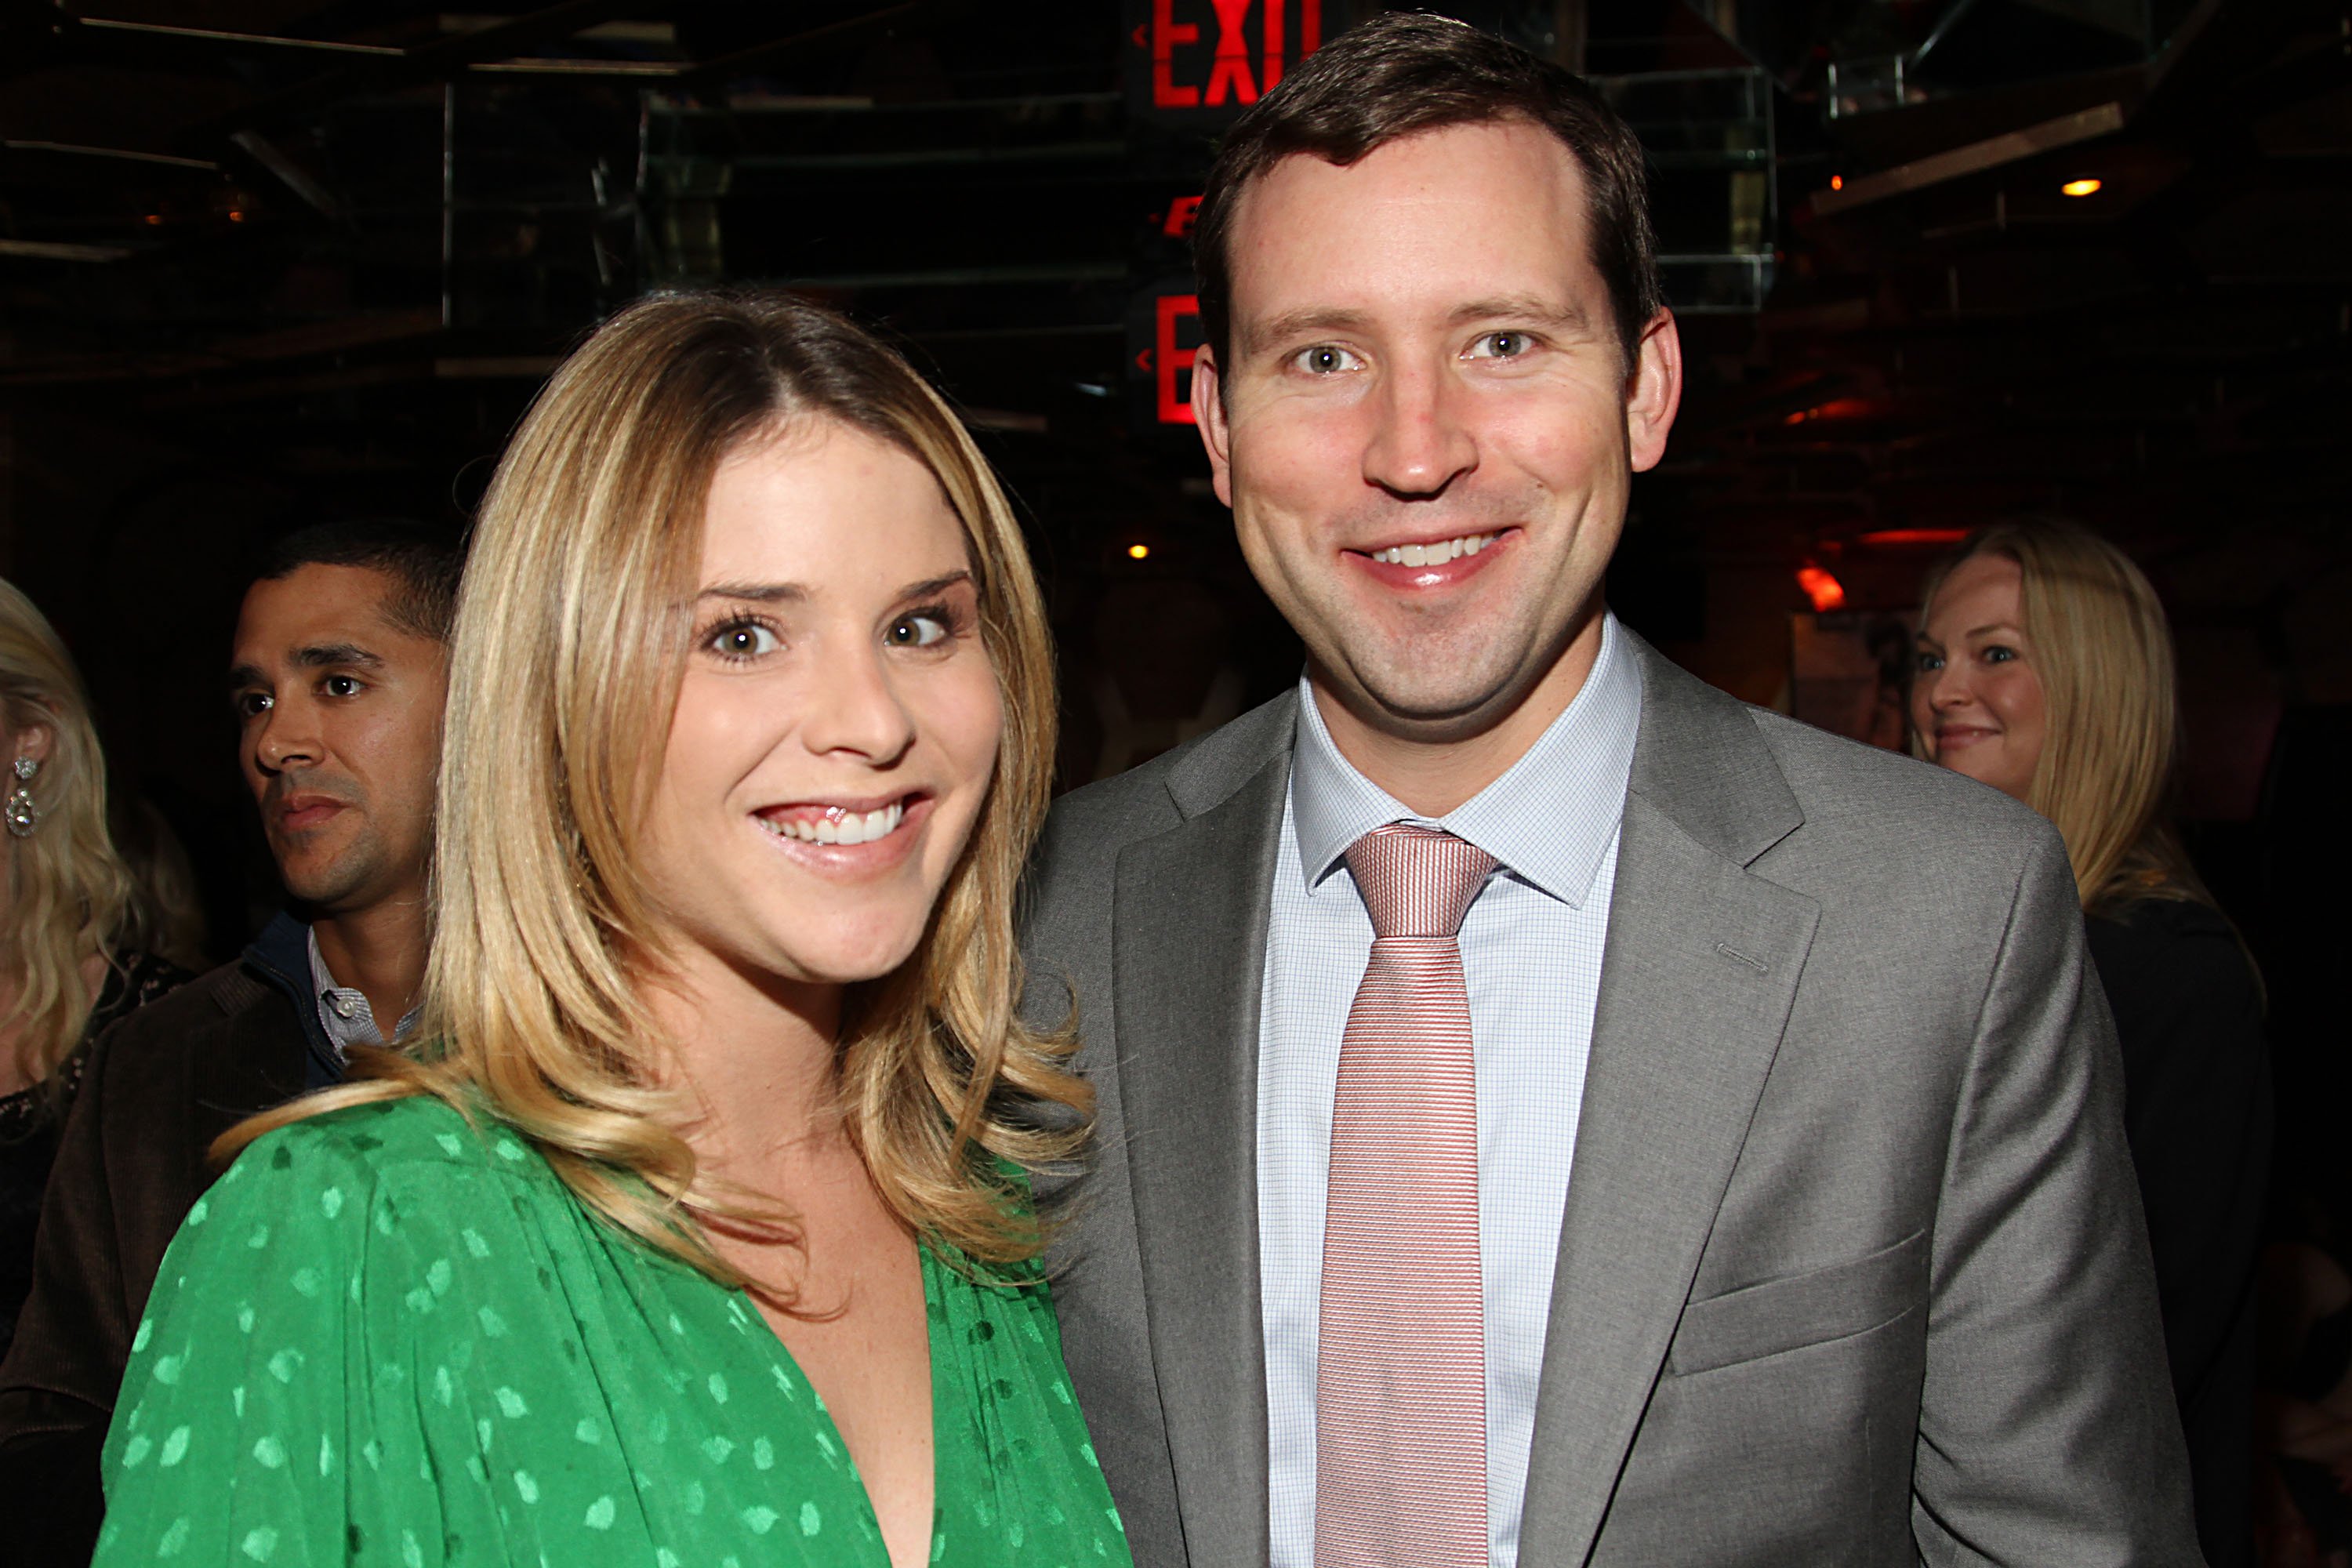 Jenna Bush Hager and Henry Hager during a 2012 event in New York City. | Photo: Getty Images